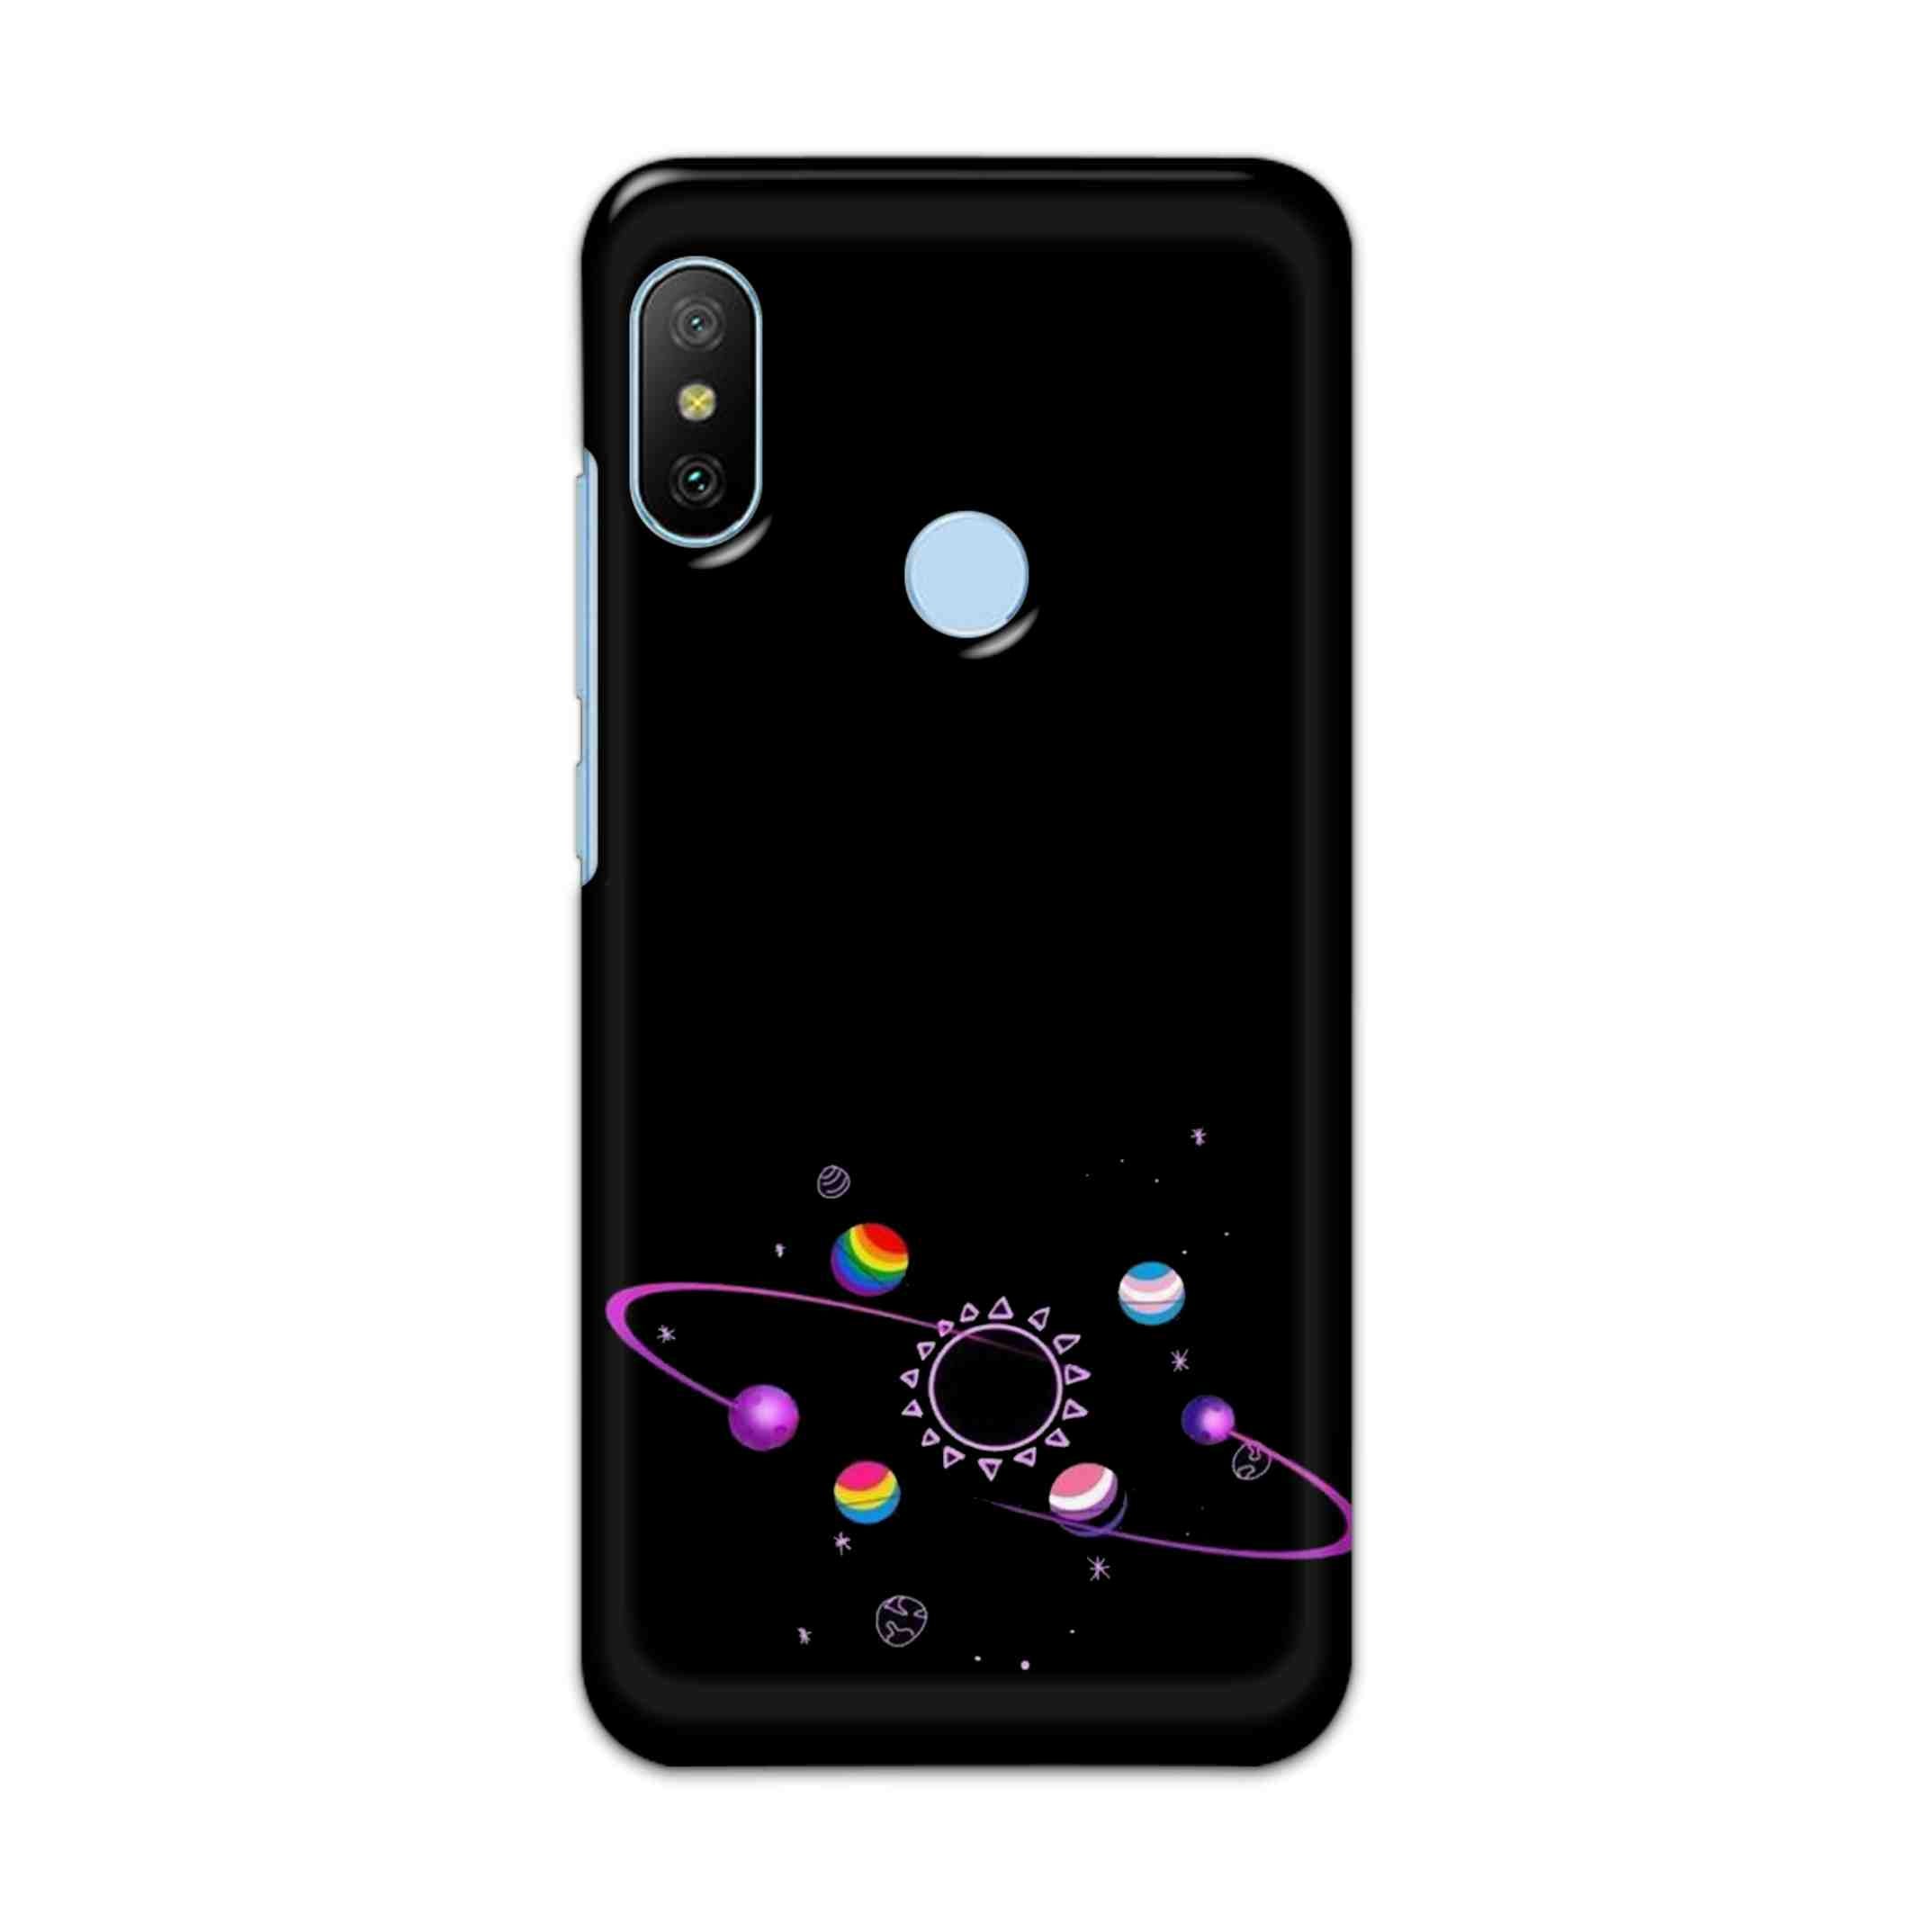 Buy Space Hard Back Mobile Phone Case/Cover For Xiaomi Redmi 6 Pro Online